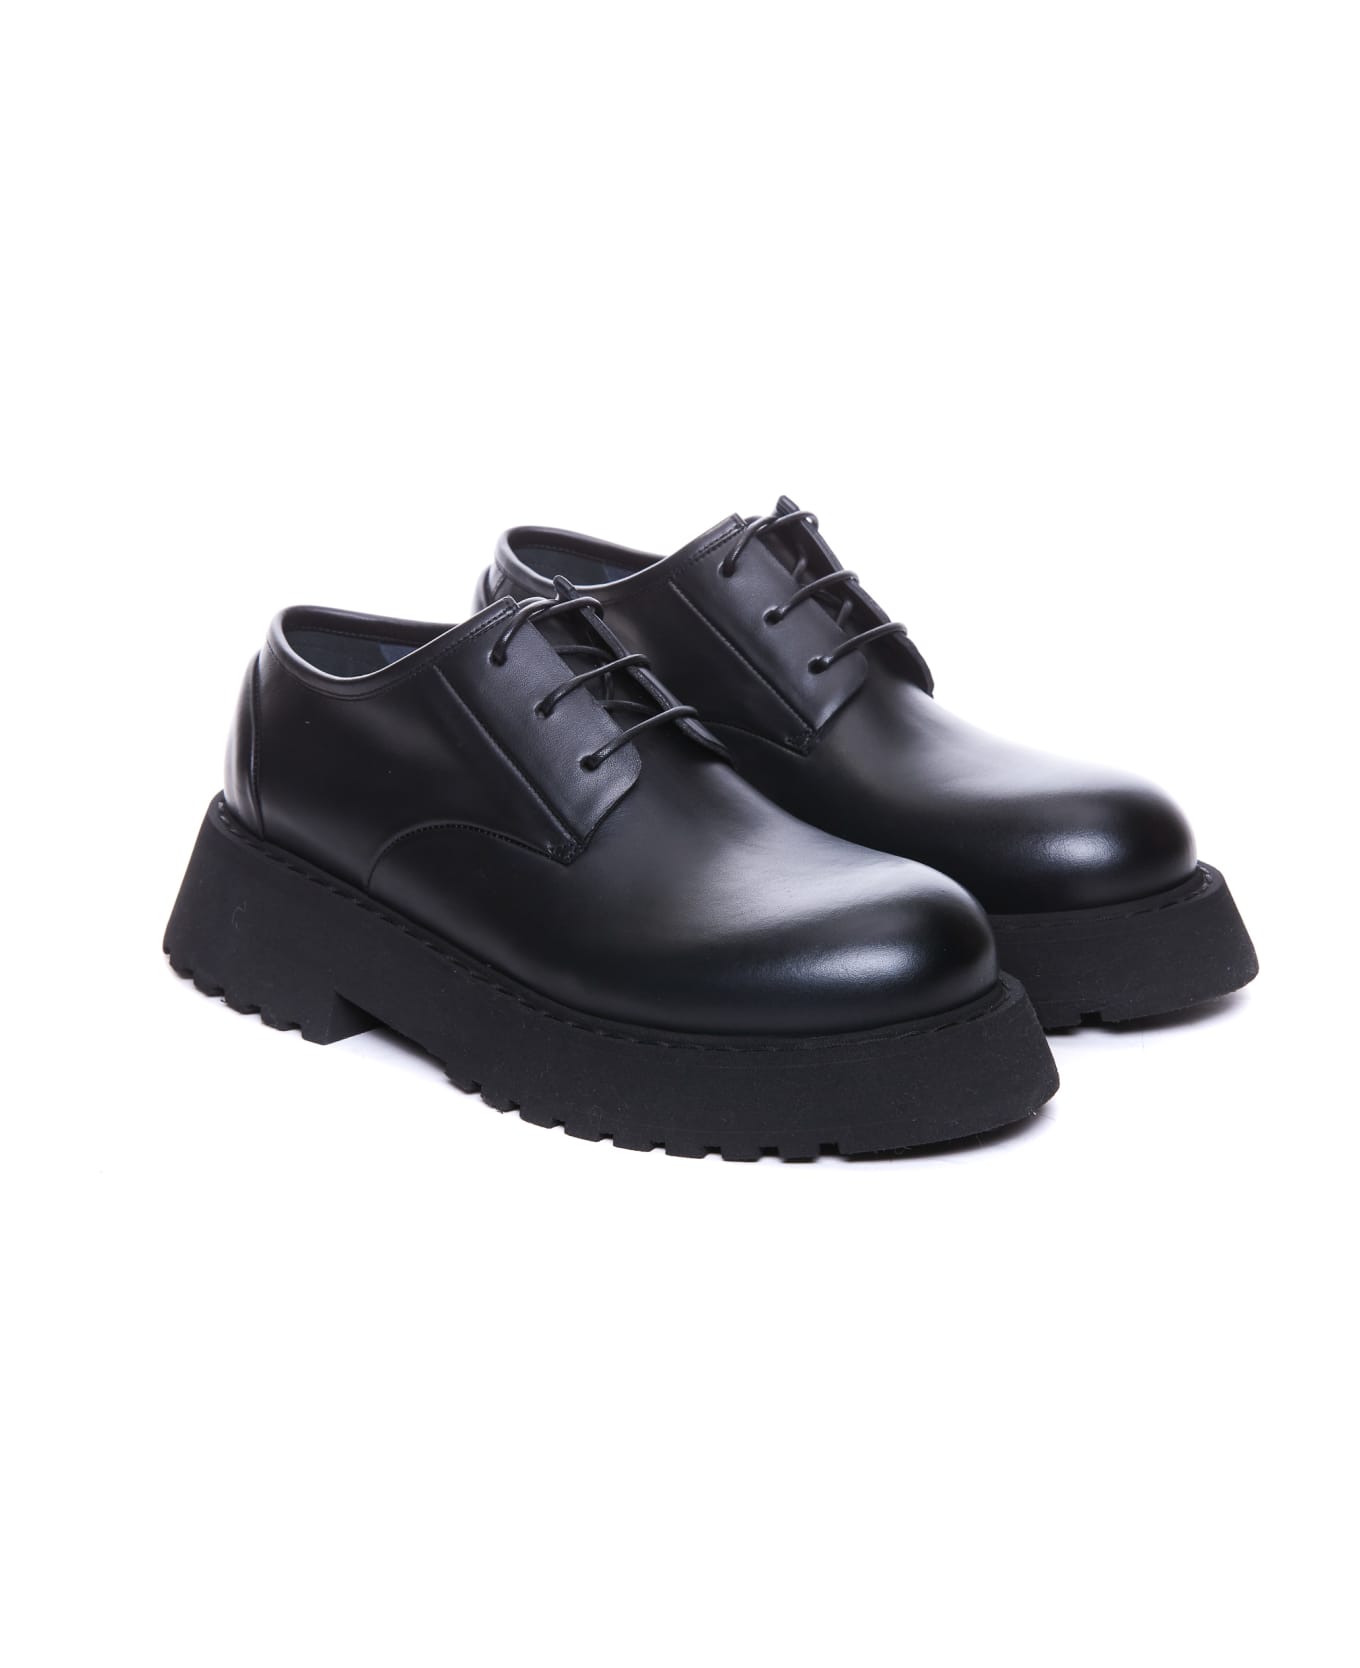 Marsell Micarro Derby Laced Up Shoes - Black ローファー＆デッキシューズ